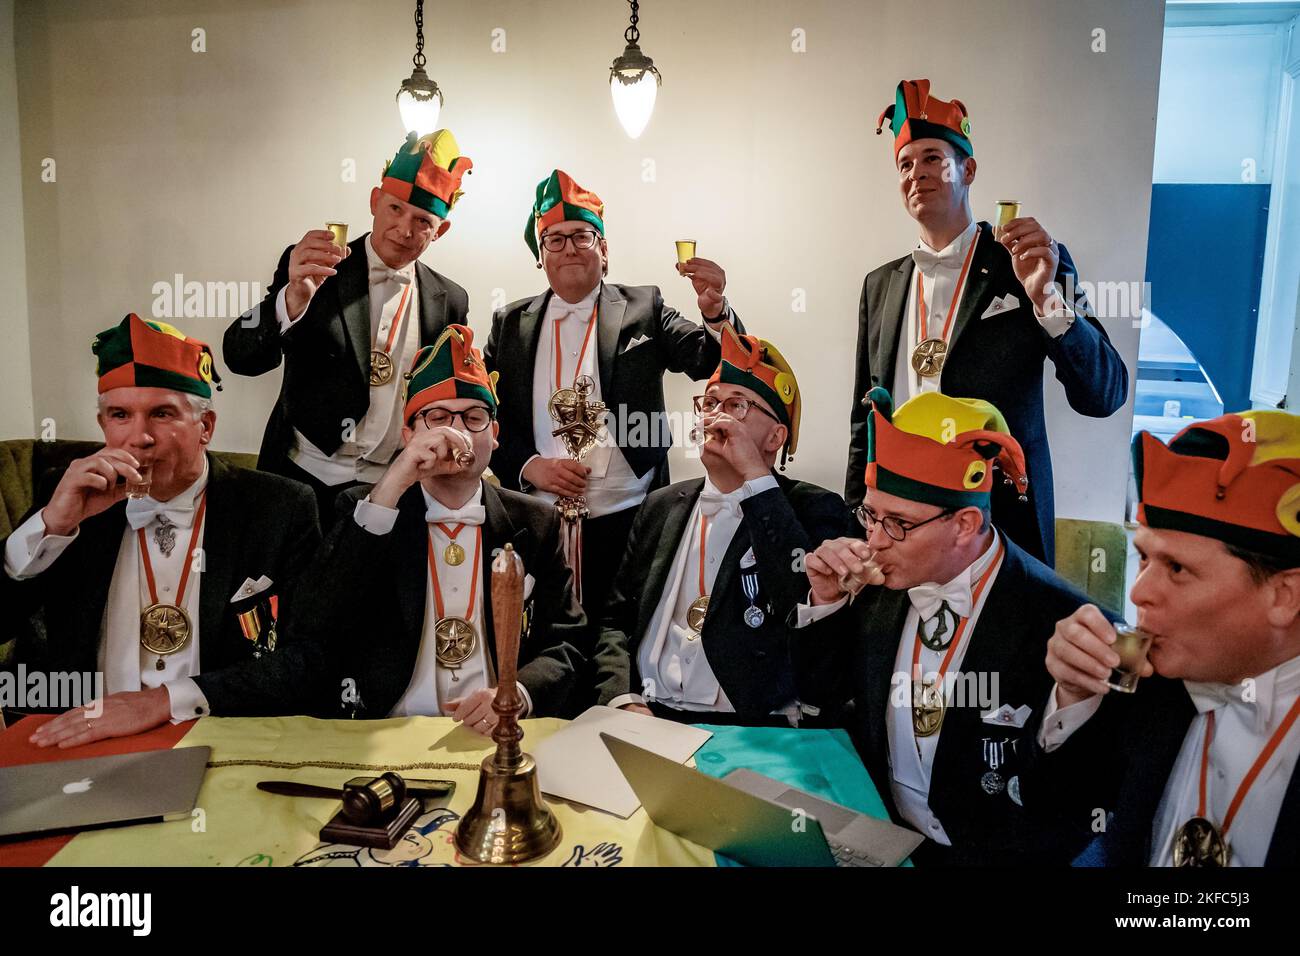 MAASTRICHT - City carnival association De Tempeleers exists 110 and 7 times 11 years. In restaurant Momus, the birthday was celebrated with a remake of a photo from 1925. ANP/Hollandse Hoogte/Jean-Pierre geusens netherlands out - belgium out Stock Photo